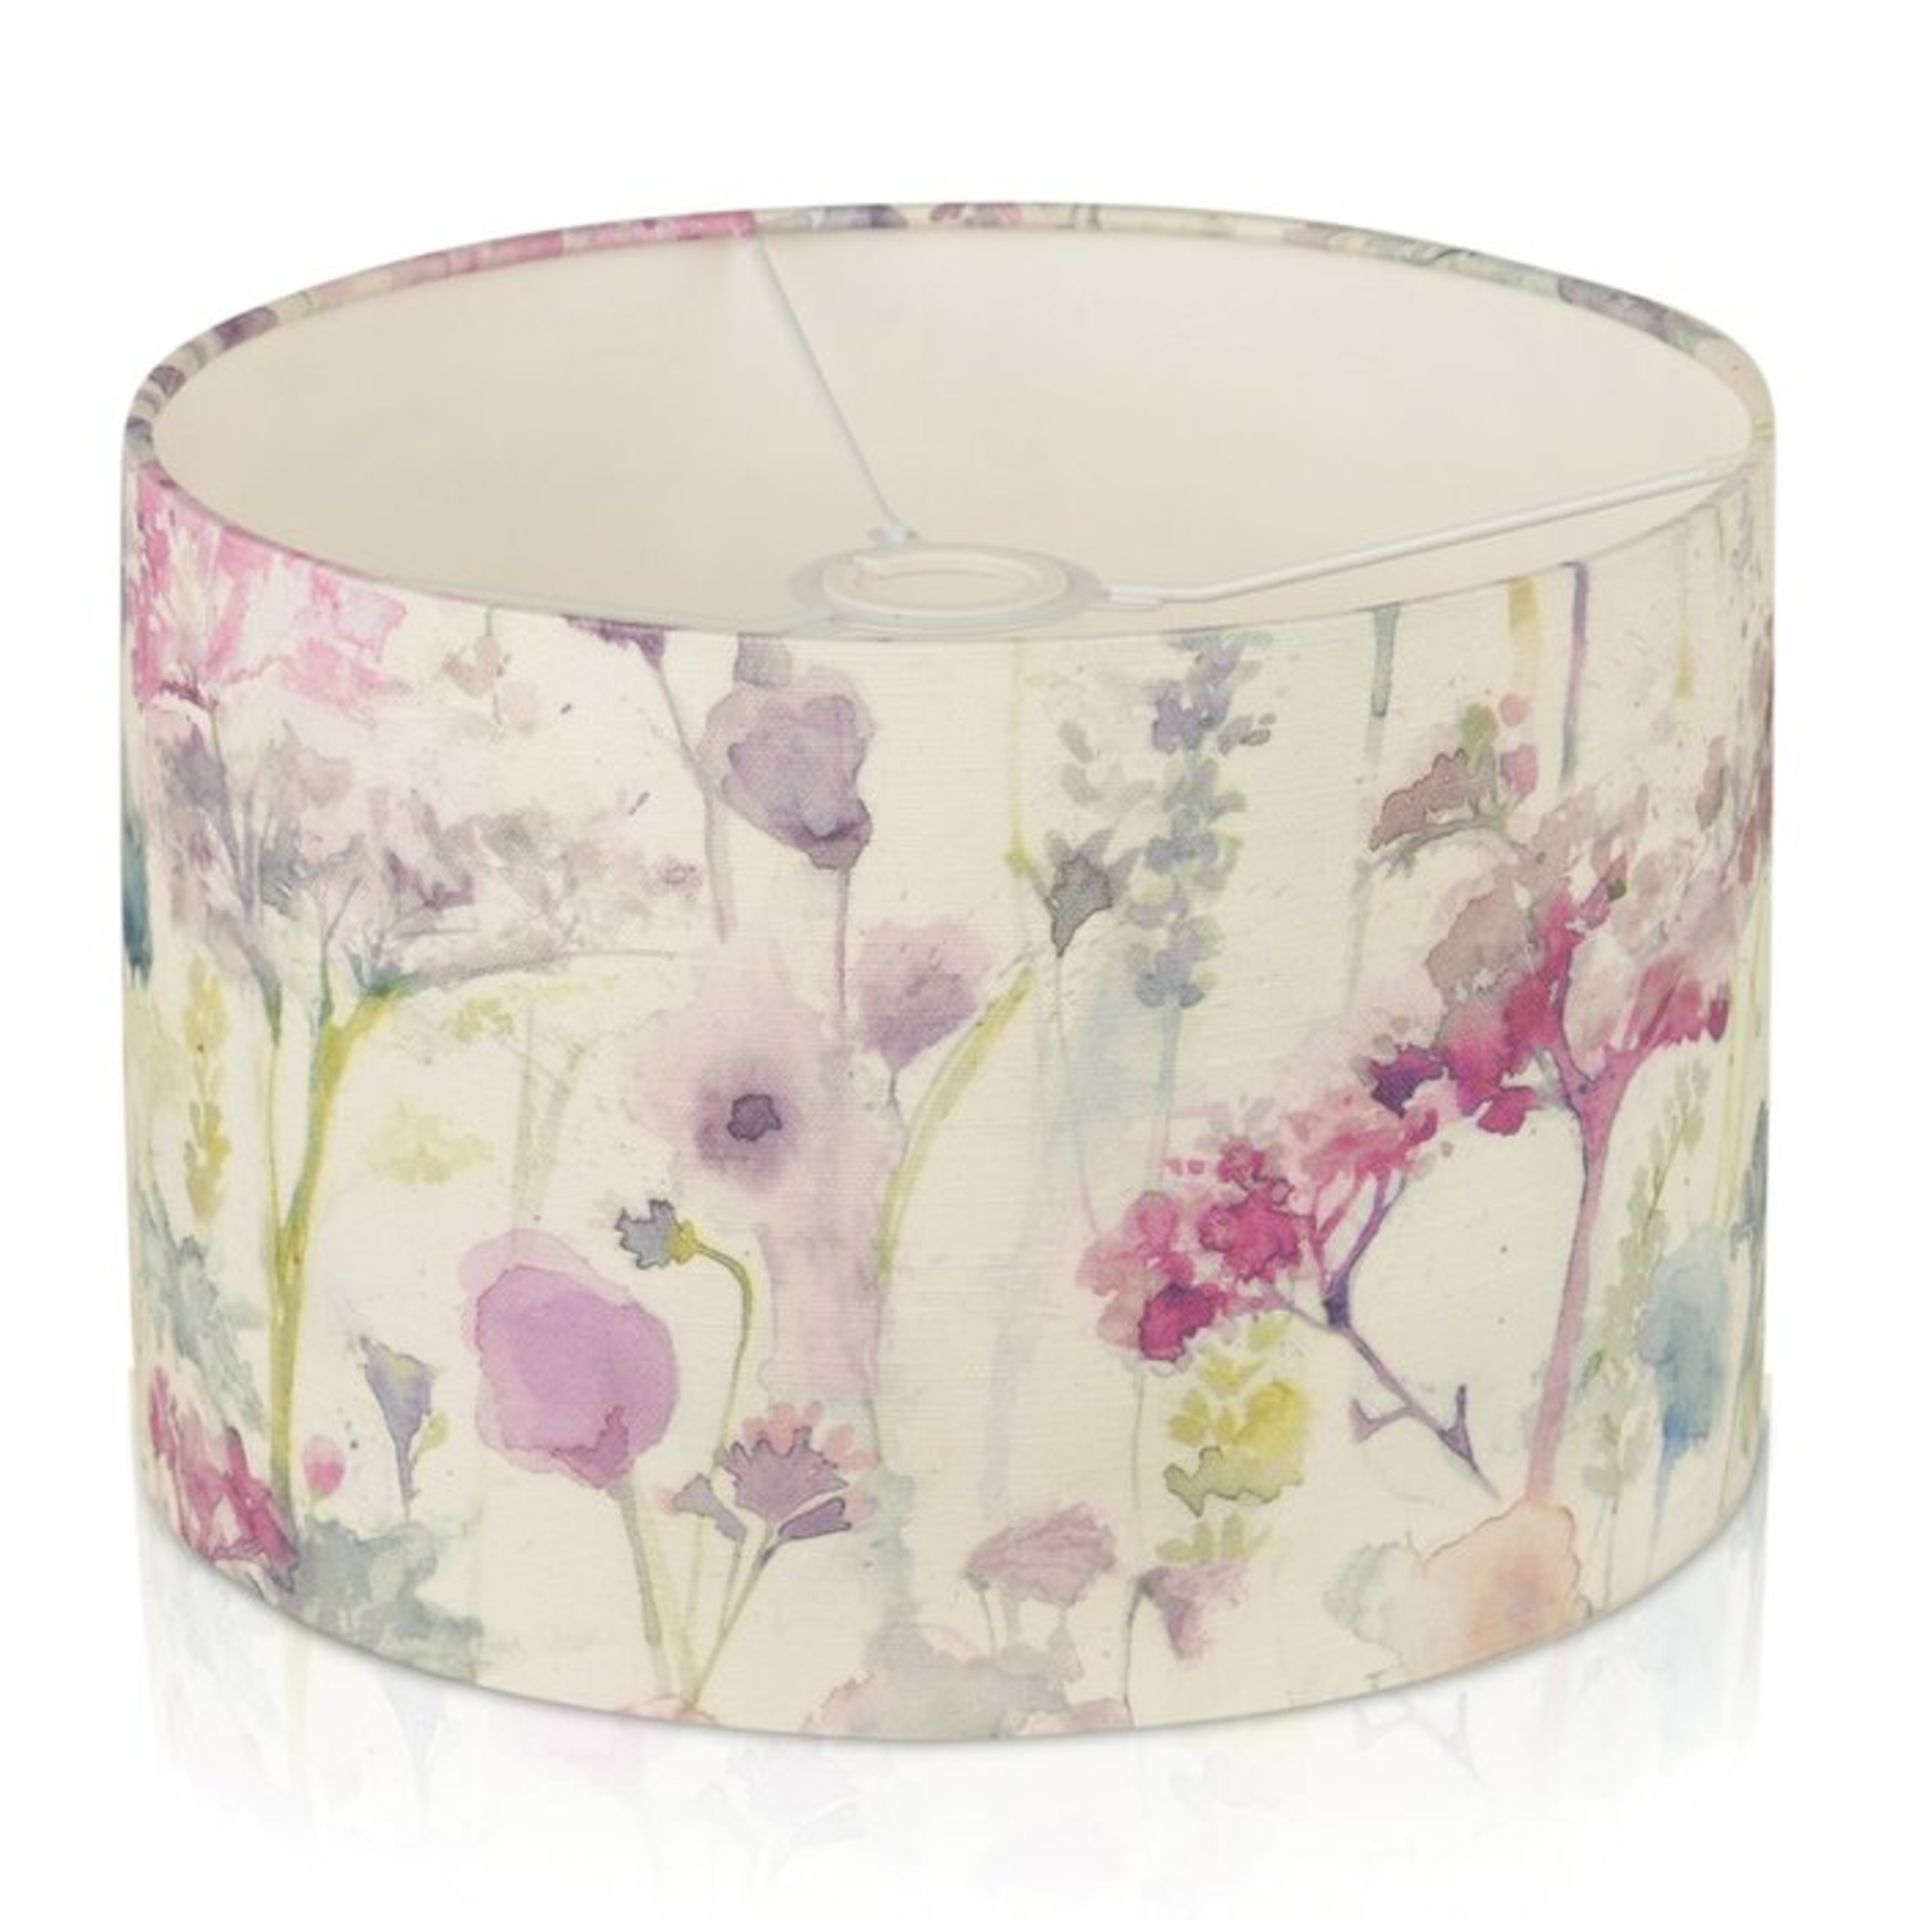 x2 Dellbrook Cotton Drum Lamp Shade - RRP £37.99